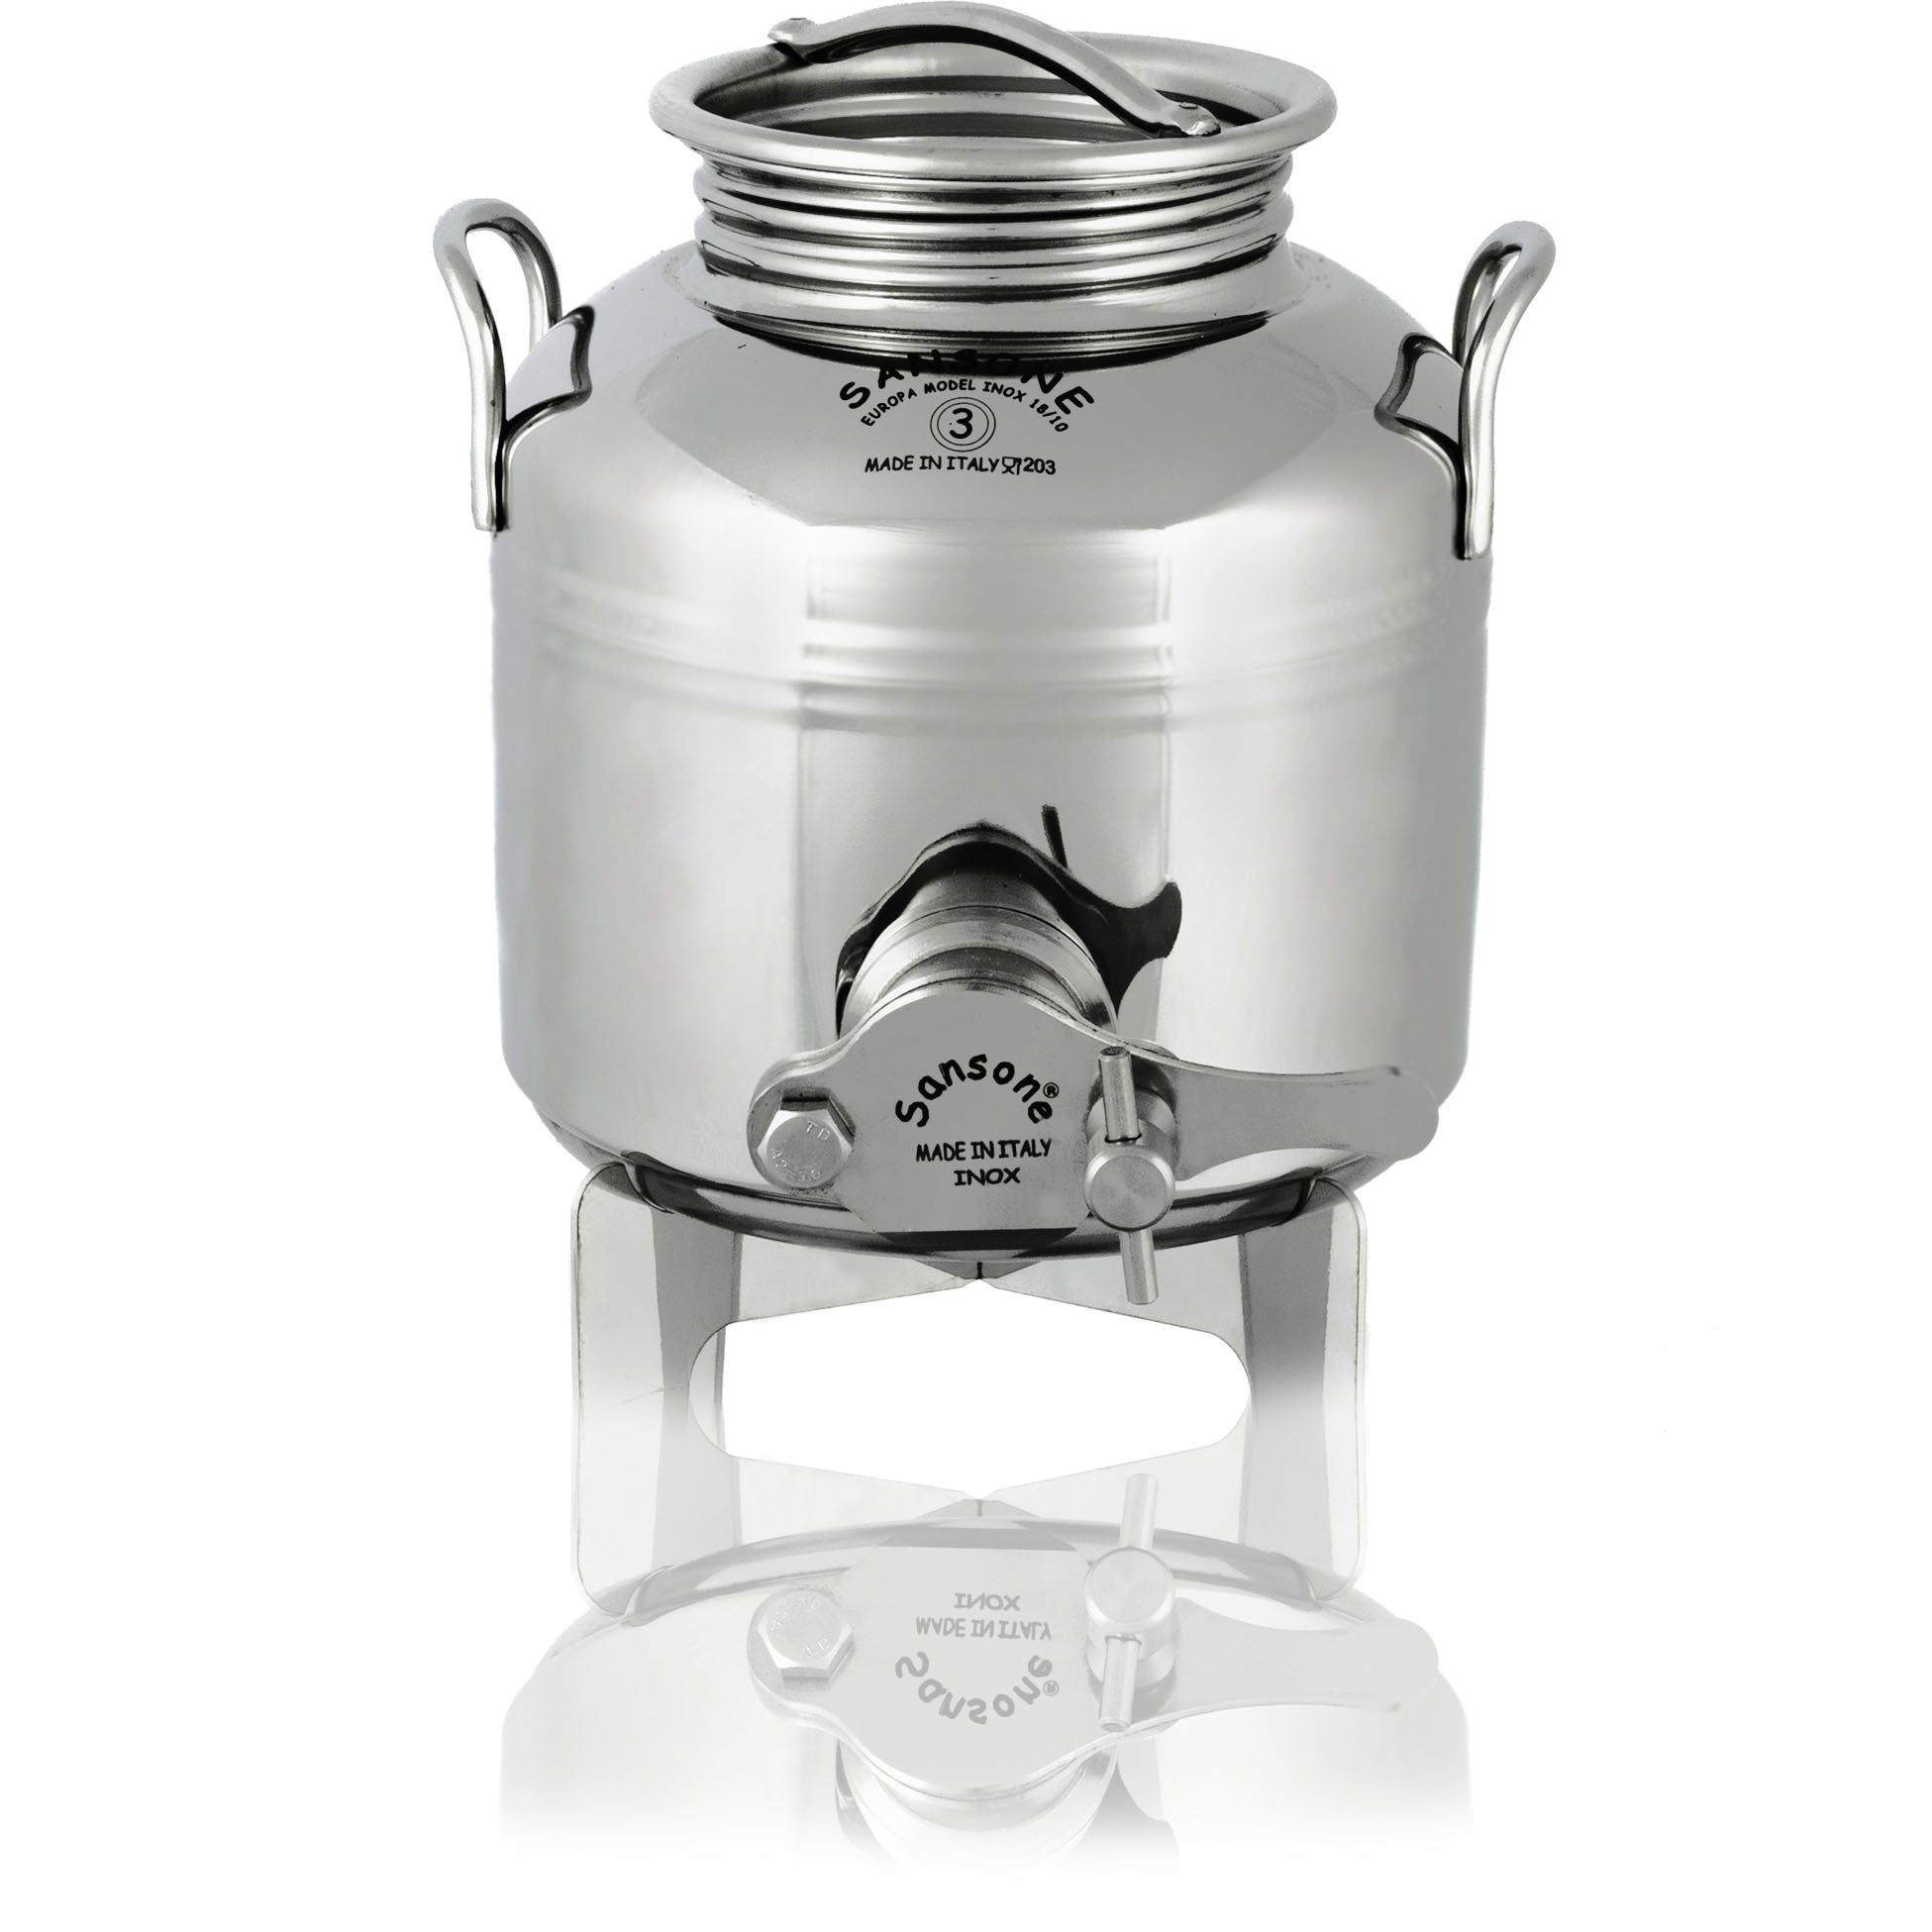 Sansone 3L/0.8 gal Honey Dispenser 18/10 Stainless Steel Canister - NSF Certified with Steel Spigot – Made in Italy